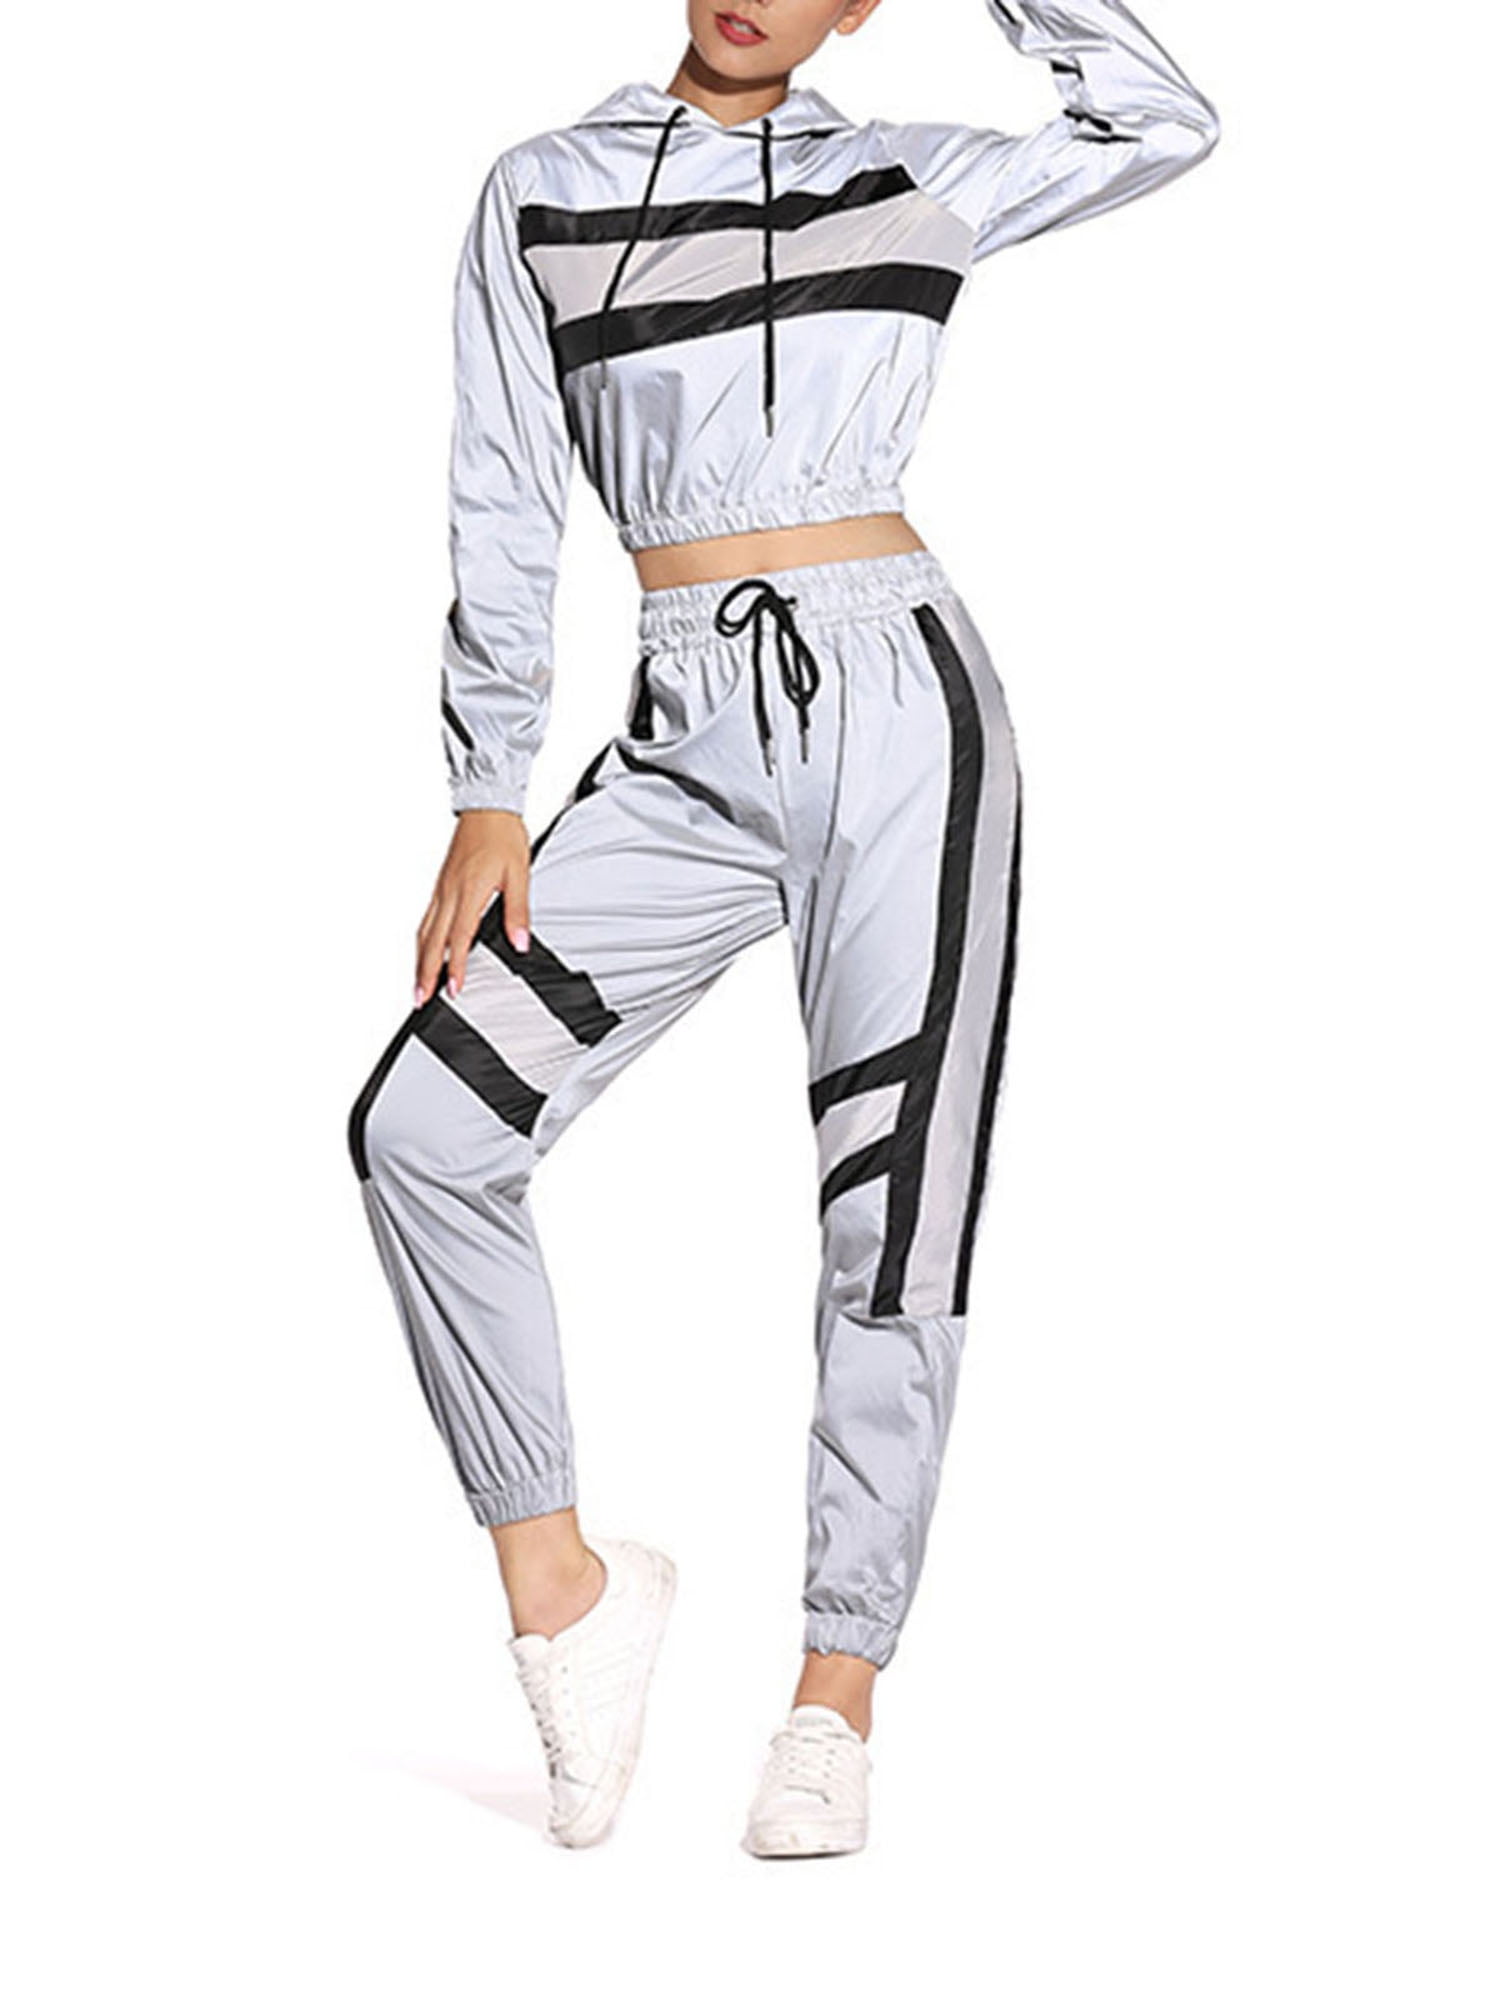 Women 2 Piece Outfit Reflective Tracksuit Lightweight Windbreaker Hooded  Jacket and High Waist Pants 